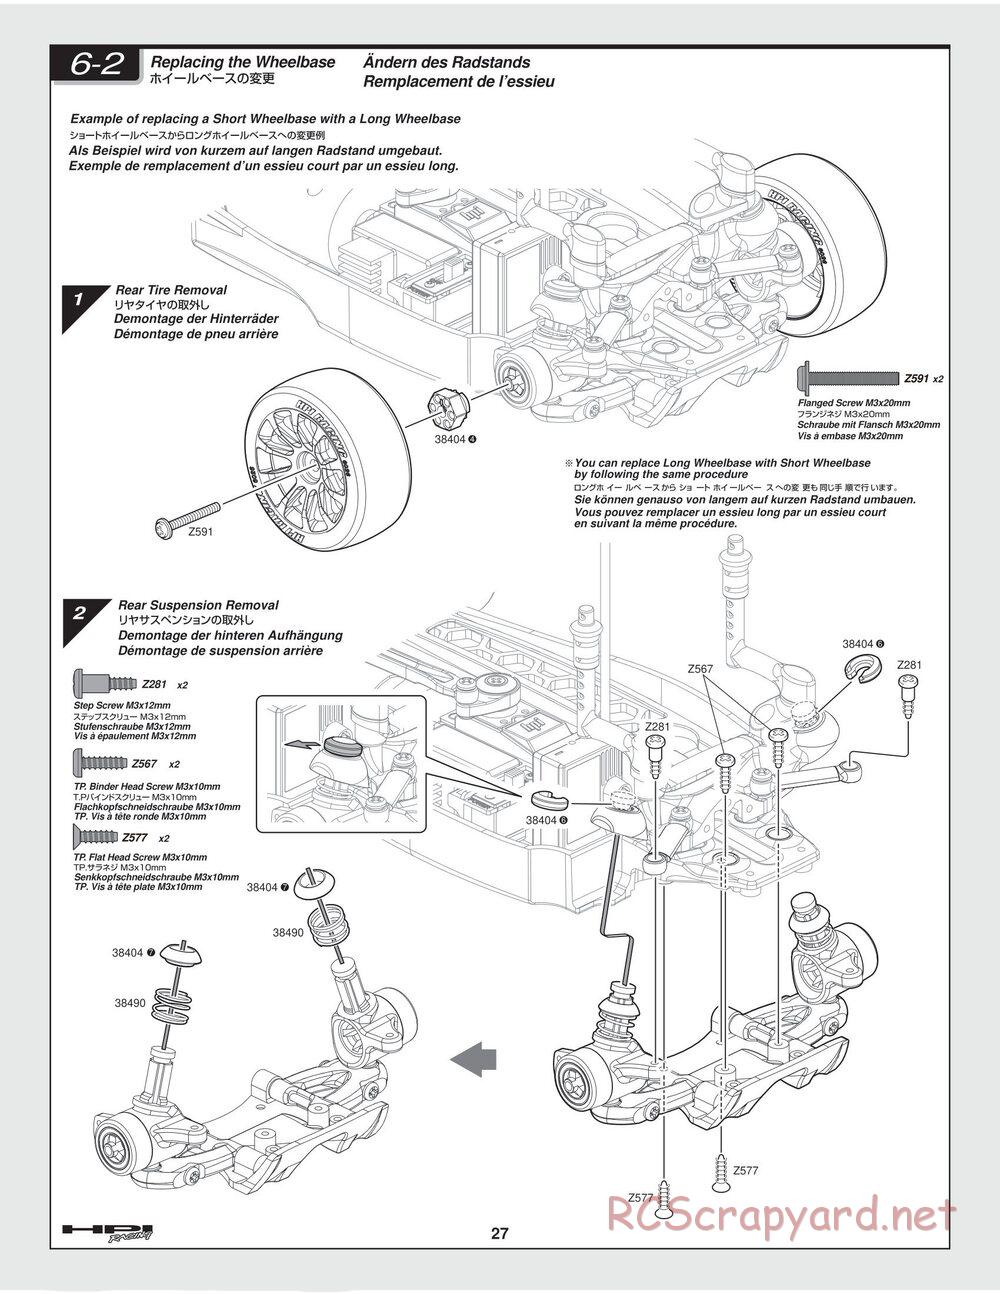 HPI - Switch - Manual - Page 27